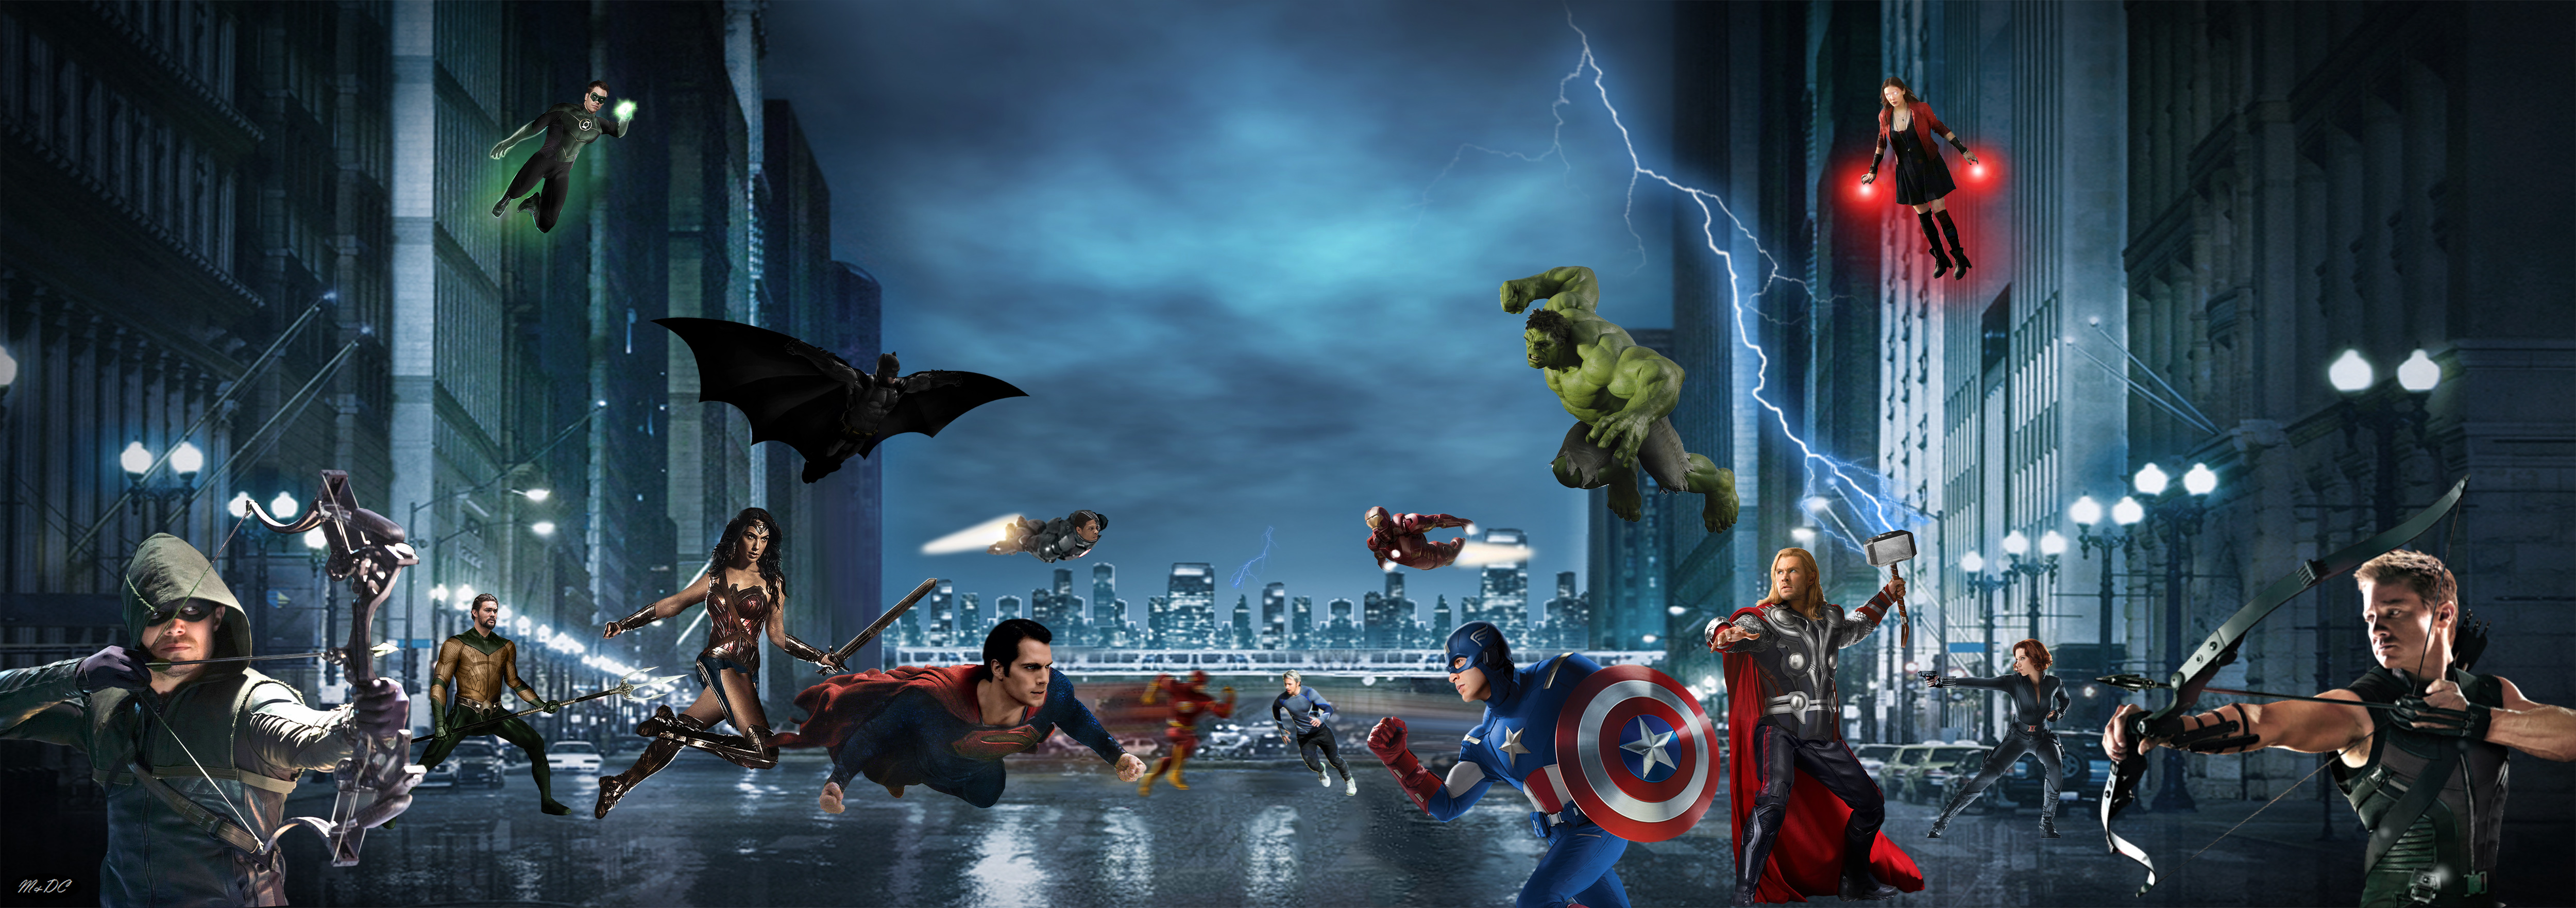 marvel_vs__dc__aka_the_avengers_v__justice_league__by_fmirza95-d7wb39h.jpg